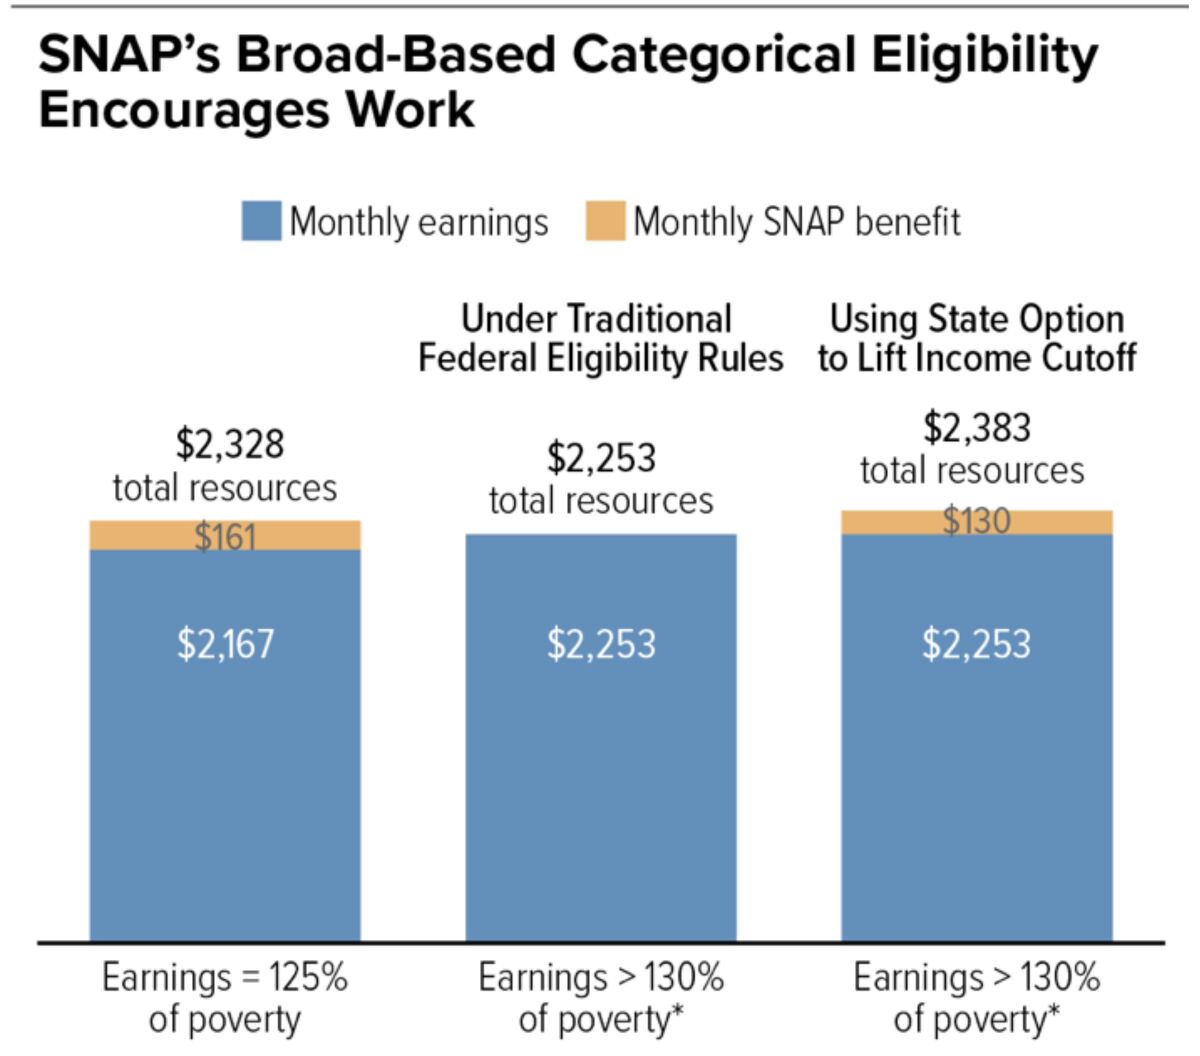 How the "benefit cliff" works: A family earning 125% of the poverty line would receive $161 in monthly food stamps, but the moment its earnings rise to more than 130%, it loses all food stamps, reducing its overall resources. Categorical eligibility protects the family from this outcome by reducing food stamp eligibility only gradually.